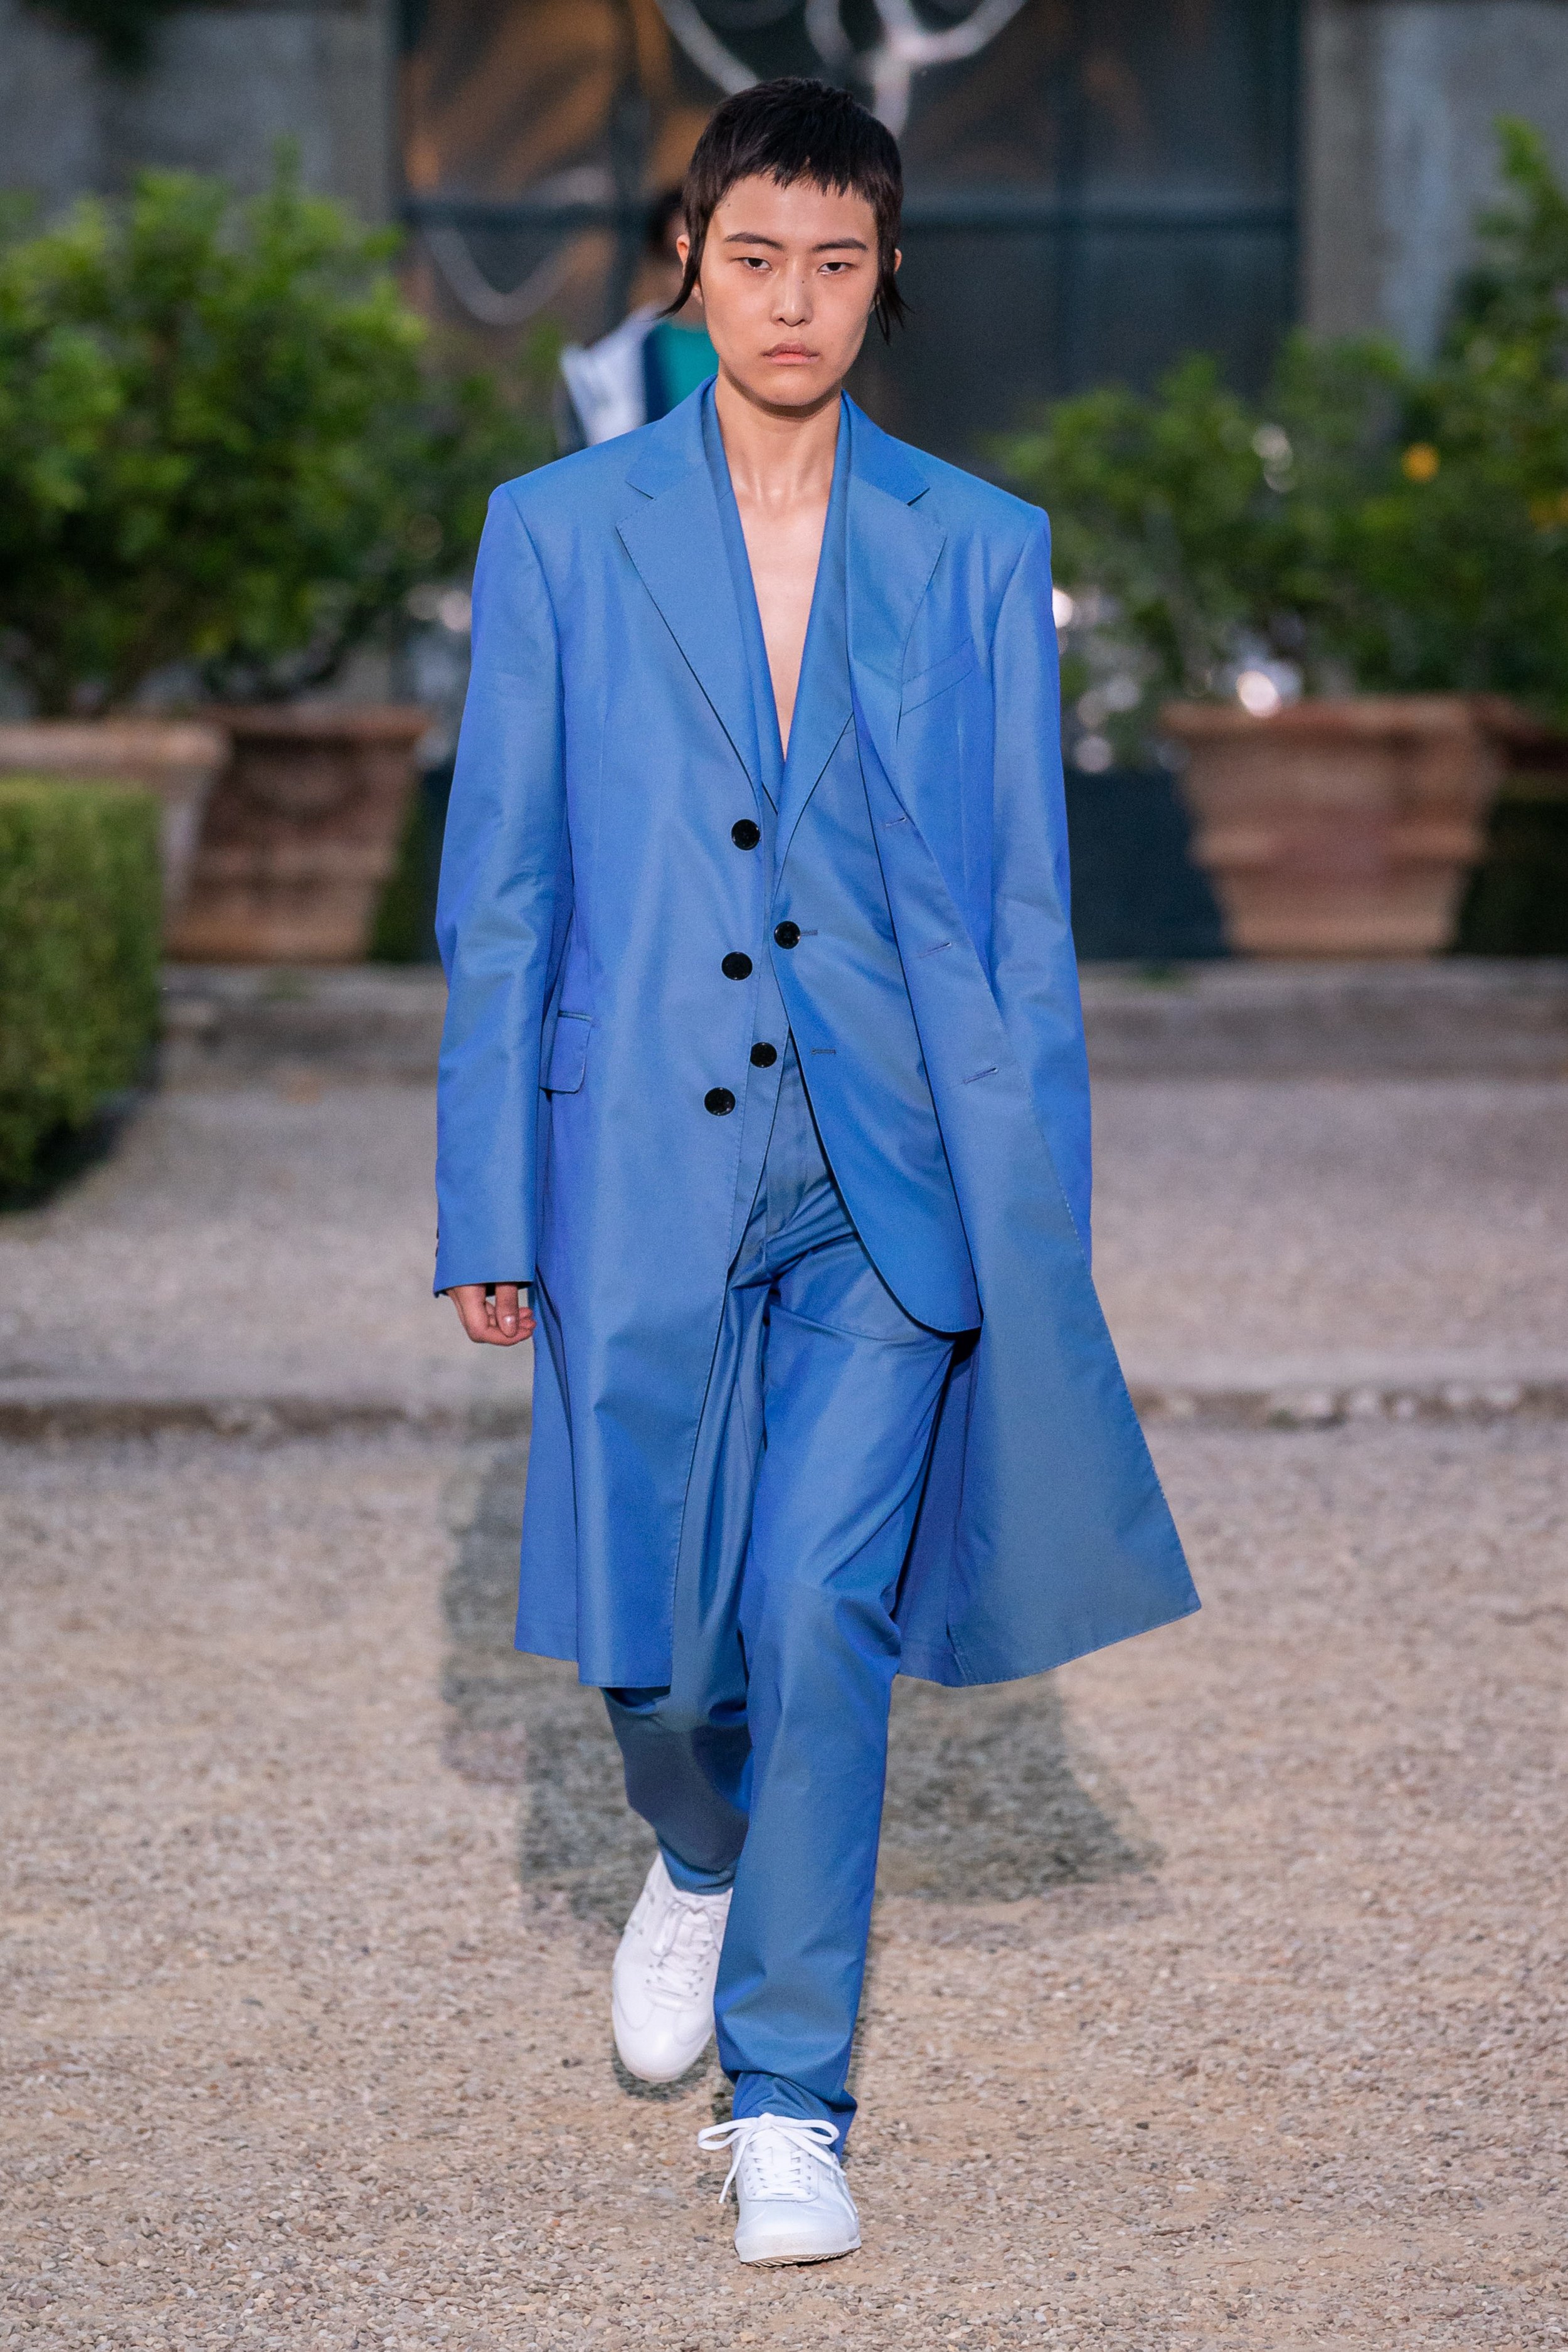 Behind_The_Blinds_Magazine_Givenchy_Men_SS20_Pitti_ALE0148.jpg